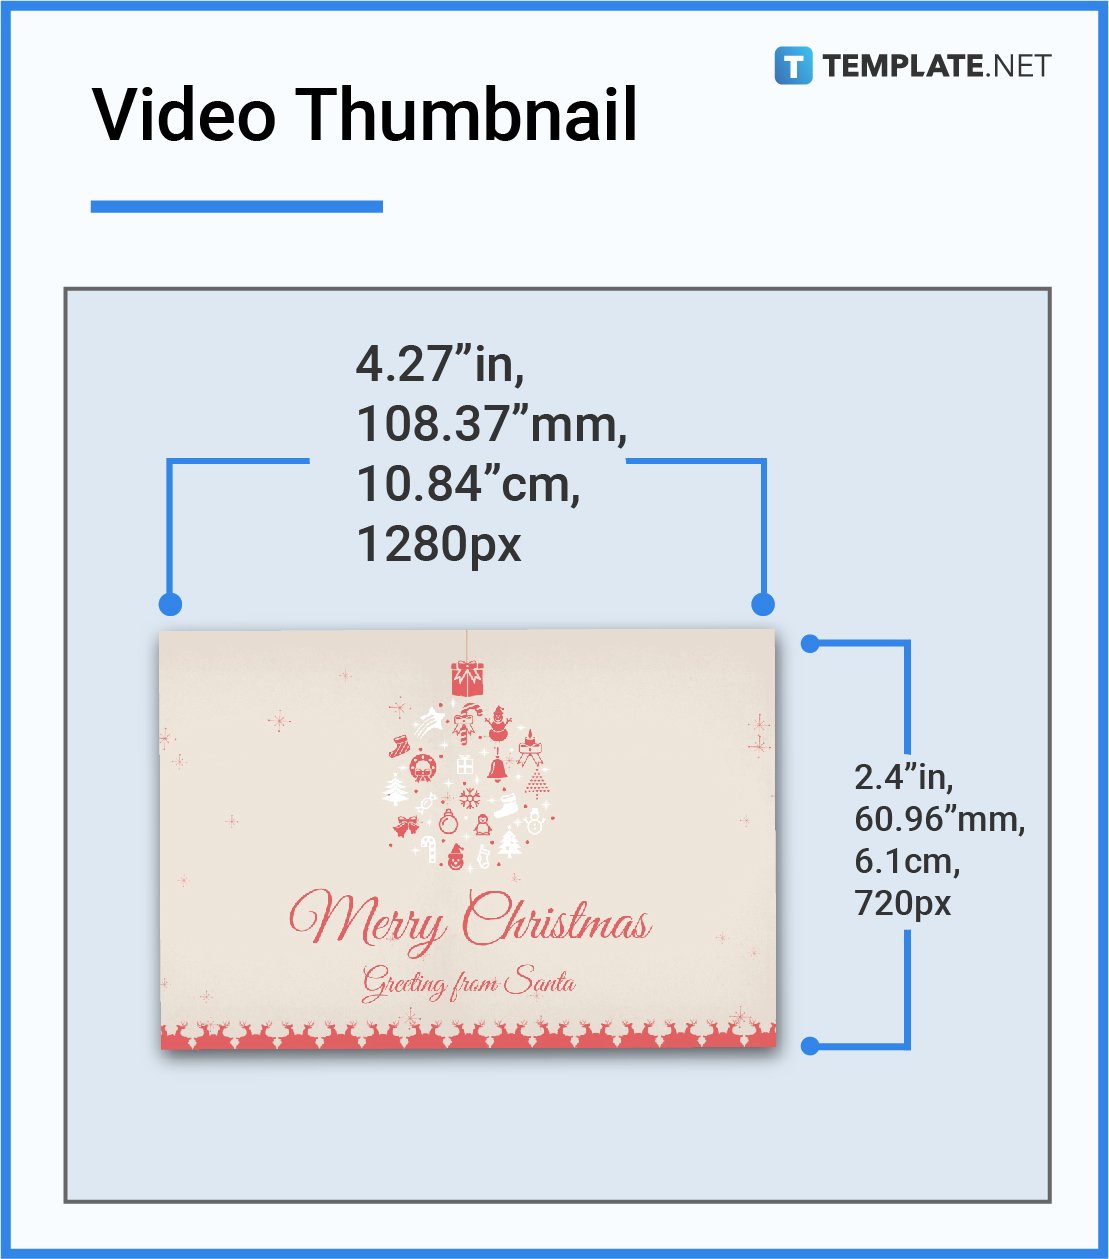 Greeting Card Sizes - Dimension, Inches, mm, cms, Pixel